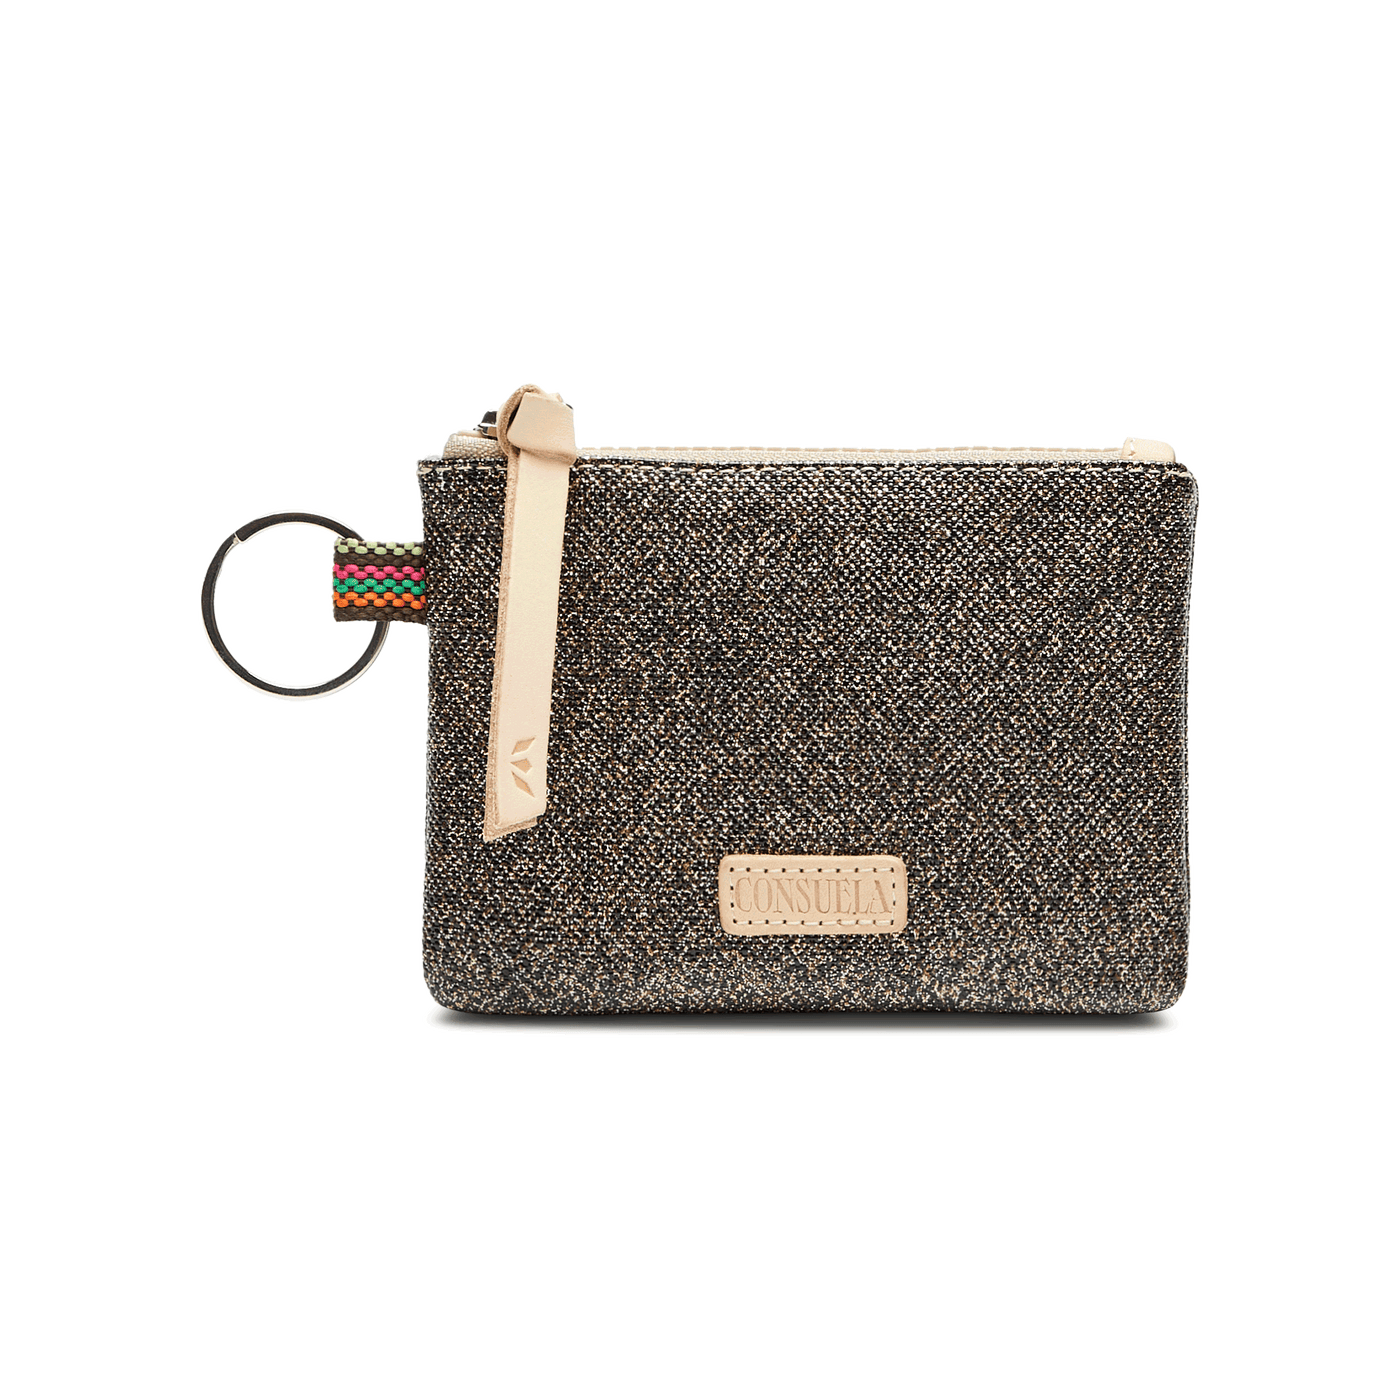 Consuela Pouch - Glitter-110 Handbags-Consuela-Market Street Nest, Fashionable Clothing, Shoes and Home Décor Located in Mabank, TX